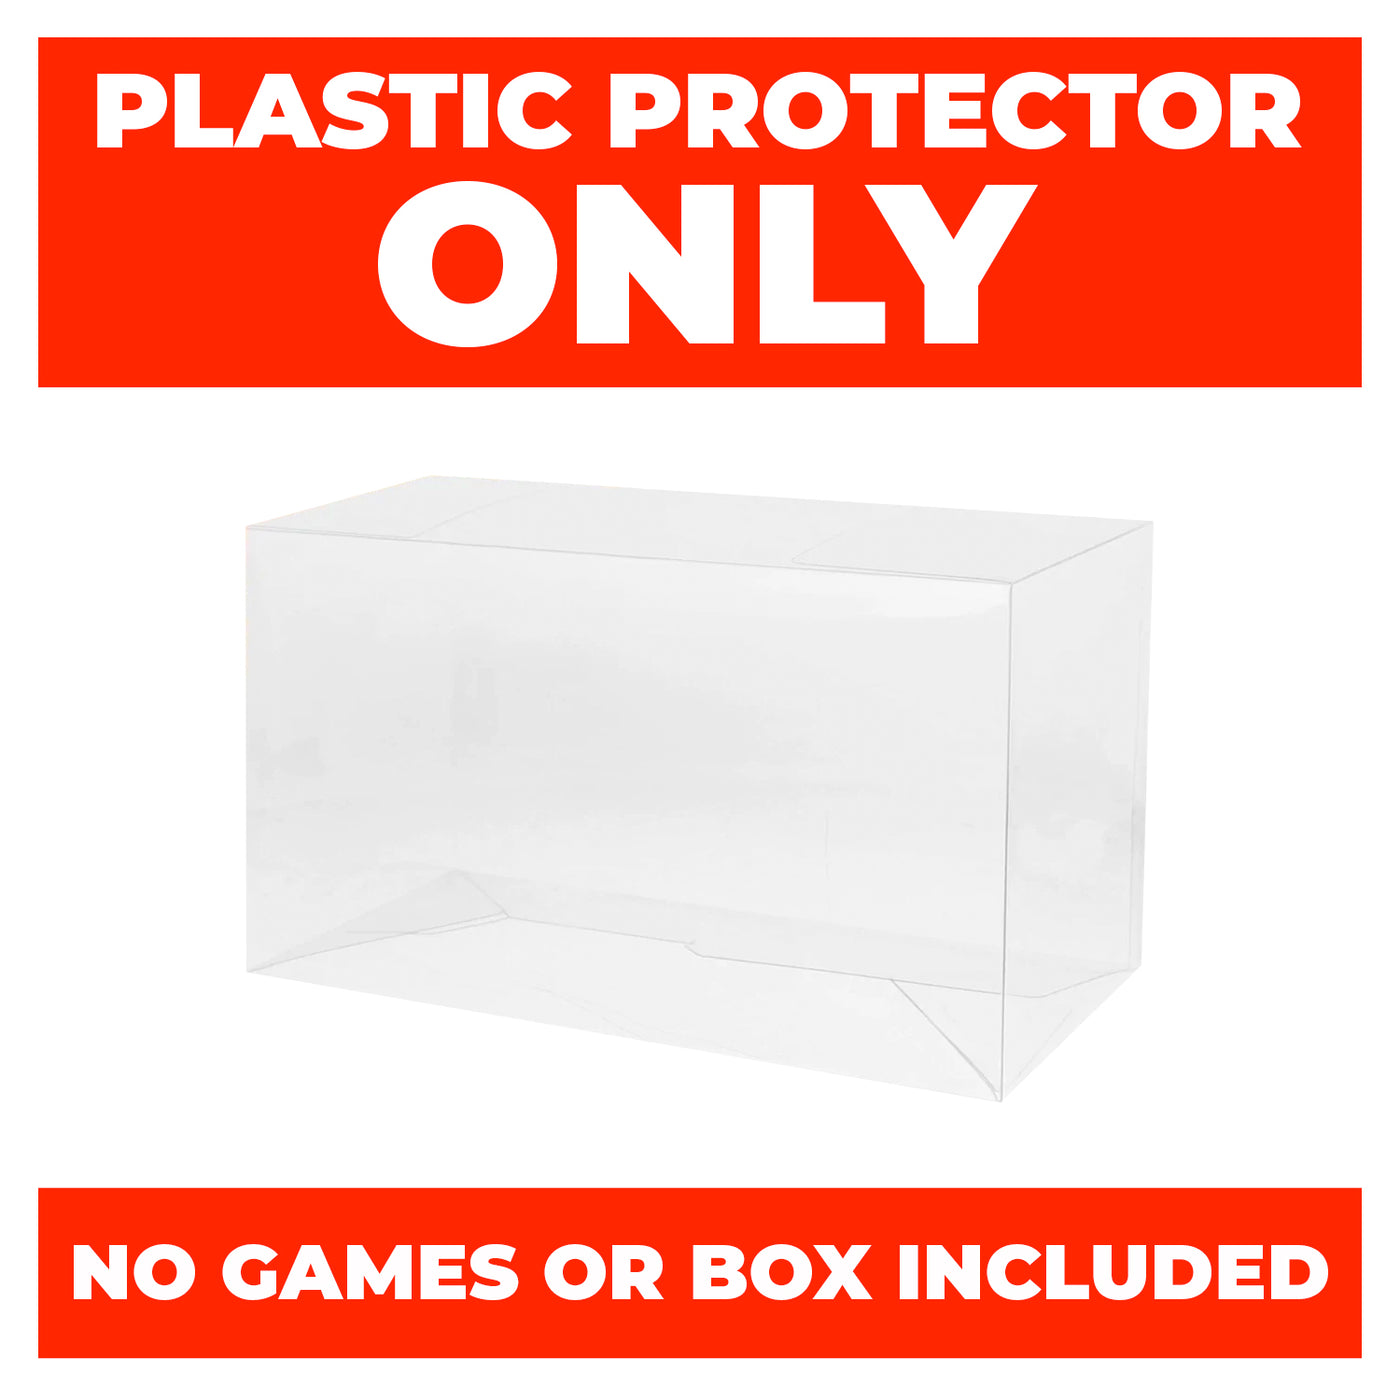 Plastic Protector for SNES, N64, ATARI JAGUAR Video Game Box 0.50mm thick, UV & Scratch Resistant 5h x 7w x 1.25d on The Pop Protector Guide by Display Geek